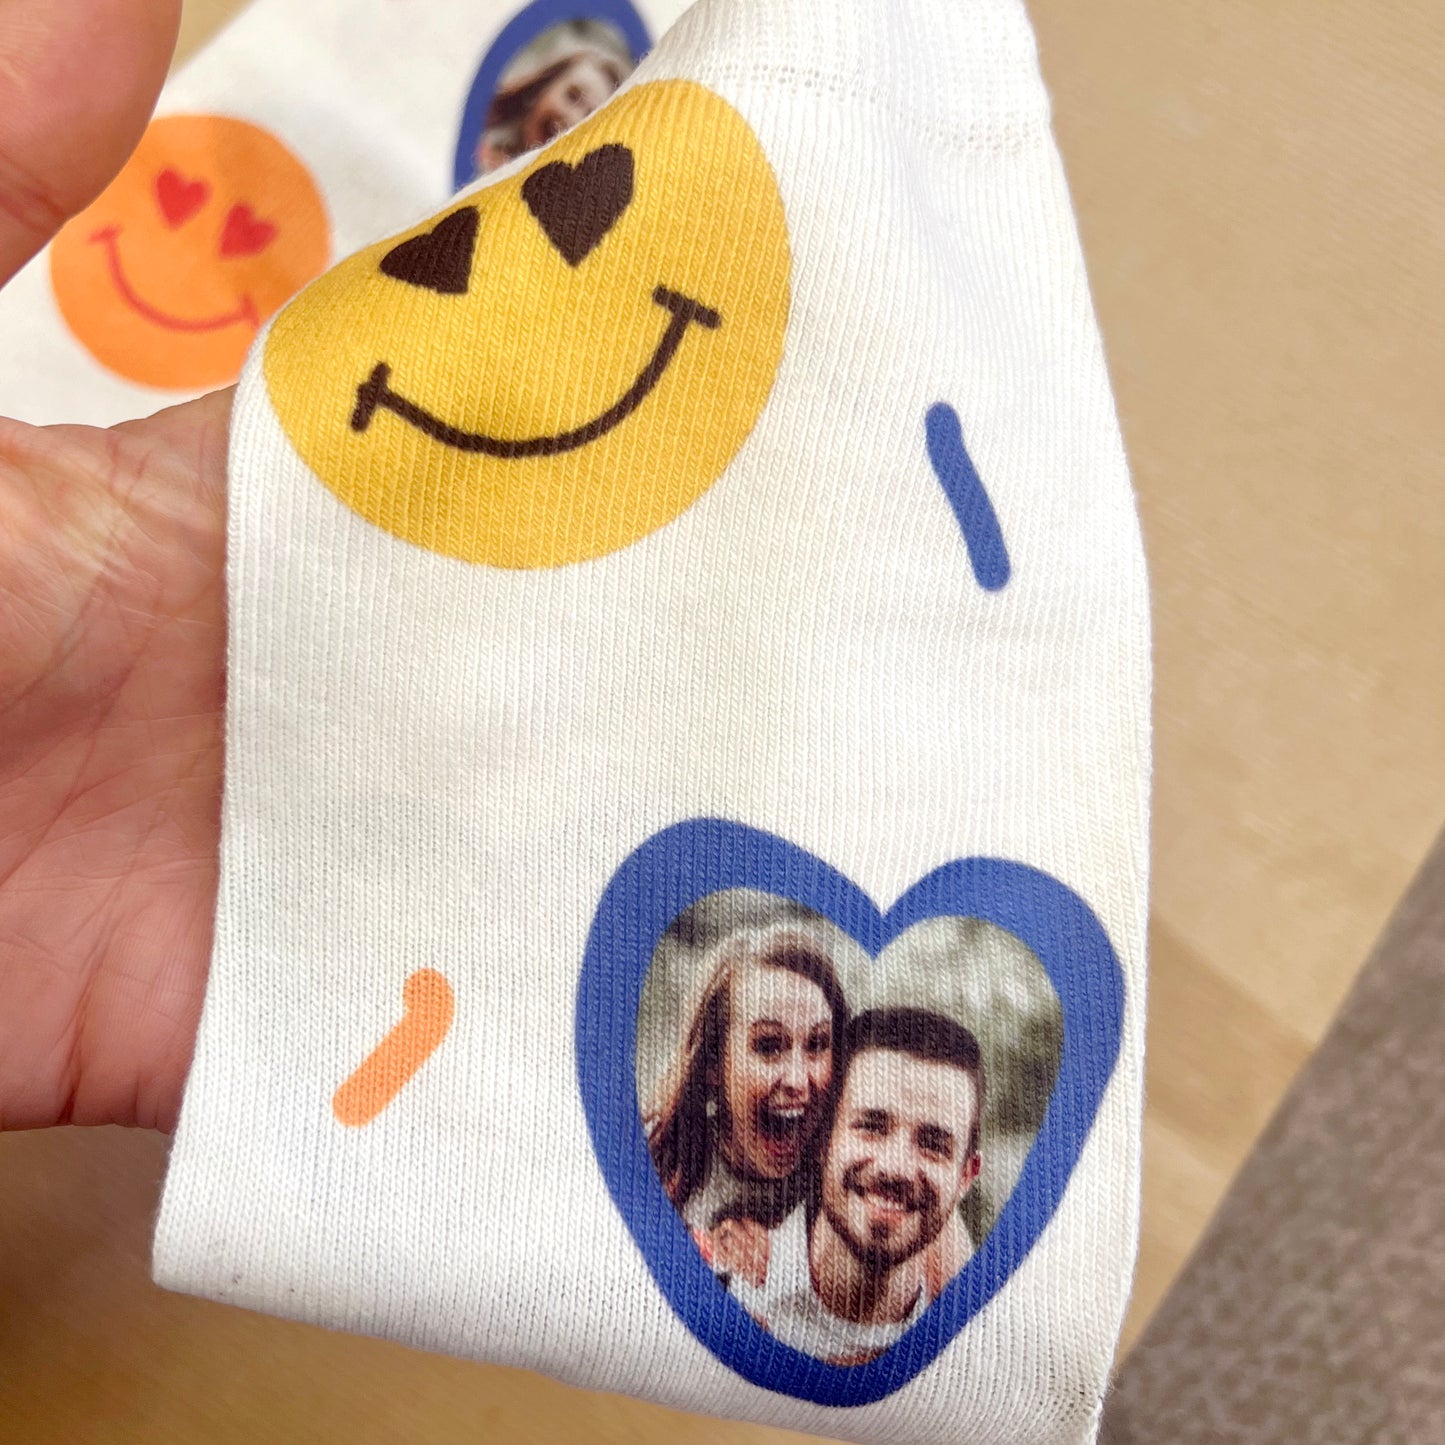 Smiley Face Personalised Photo Socks